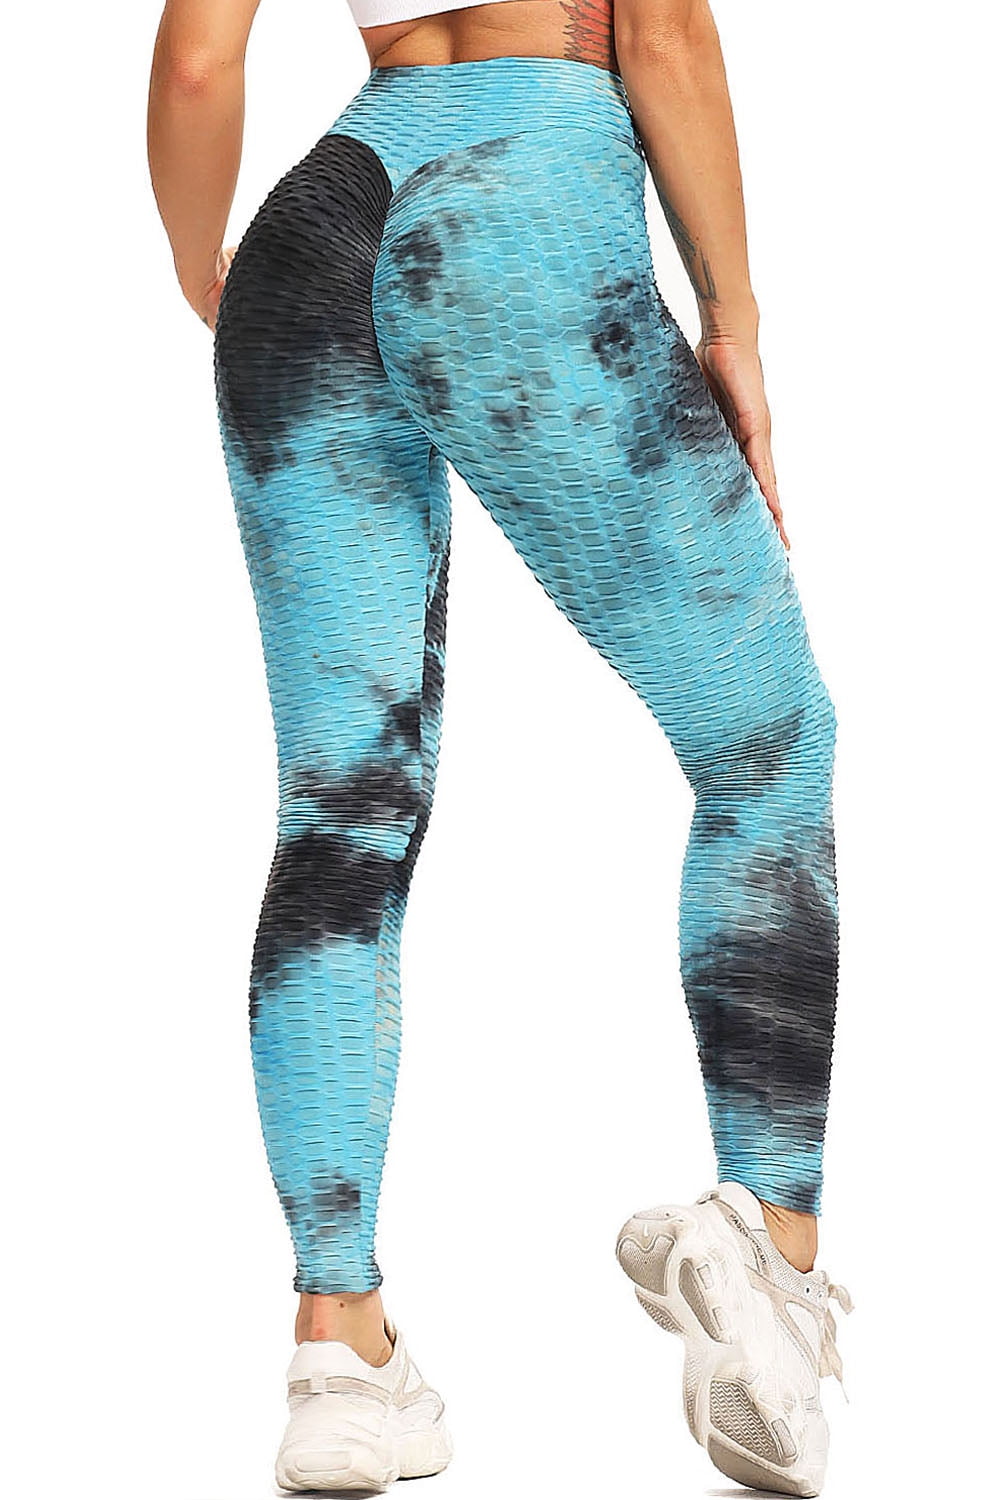 SEASUM Women's Butt Lift Yoga Leggings Tummy Control Tie Dyed Athletic Pants  Textured Workout Running Tights Black+Blue M 